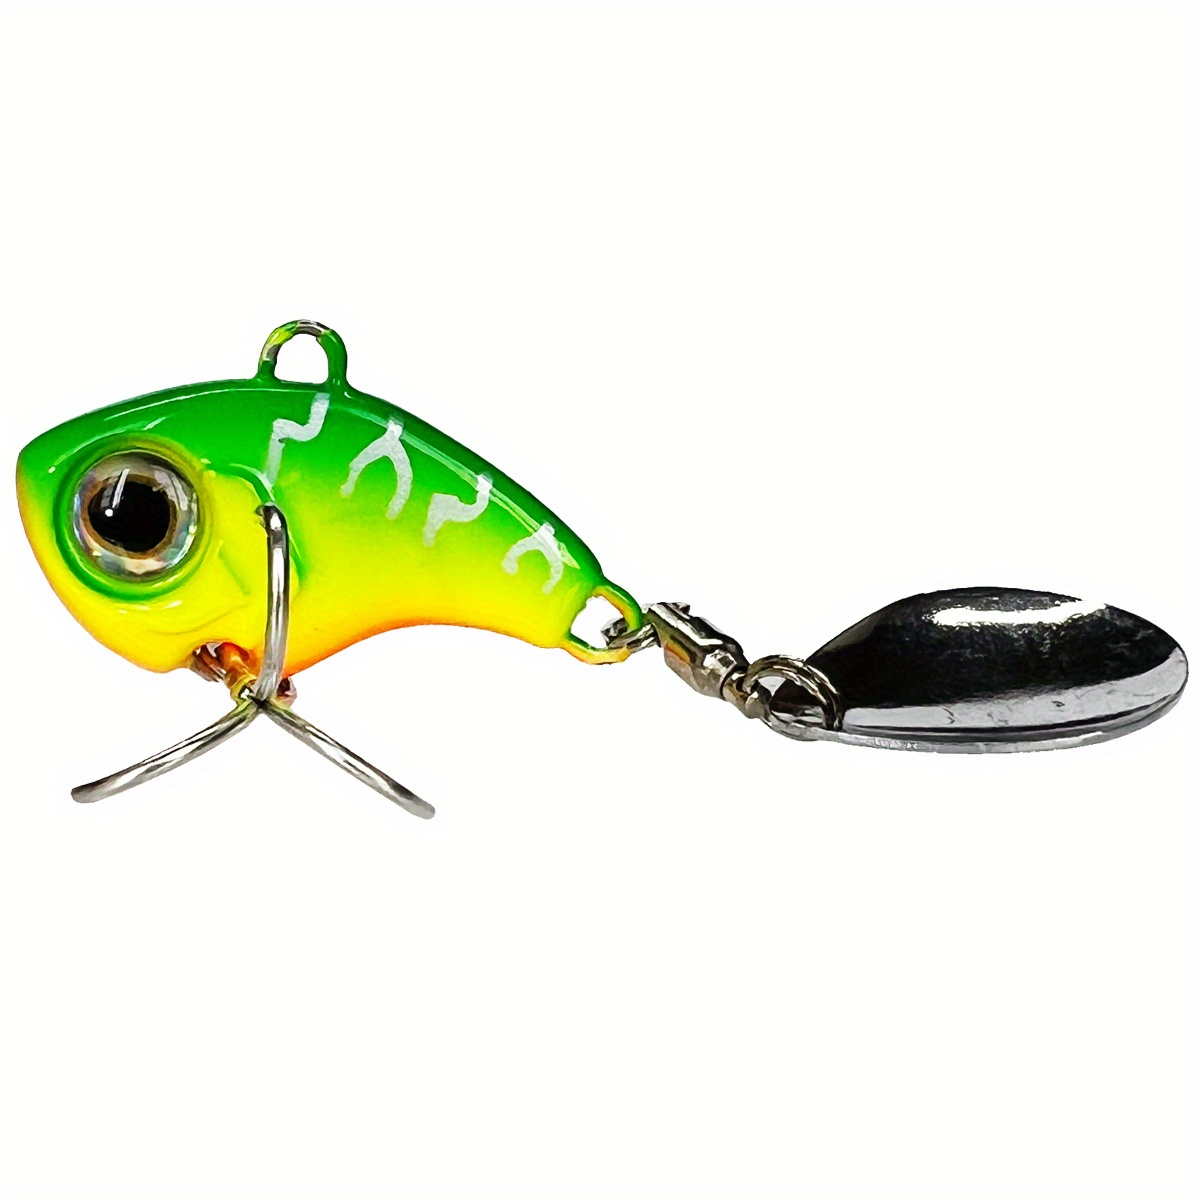 10pcs/lot fishing spoon lures spinner bait 2.5-4g fishing wobbler metal baits  spinnerbait isca artificial